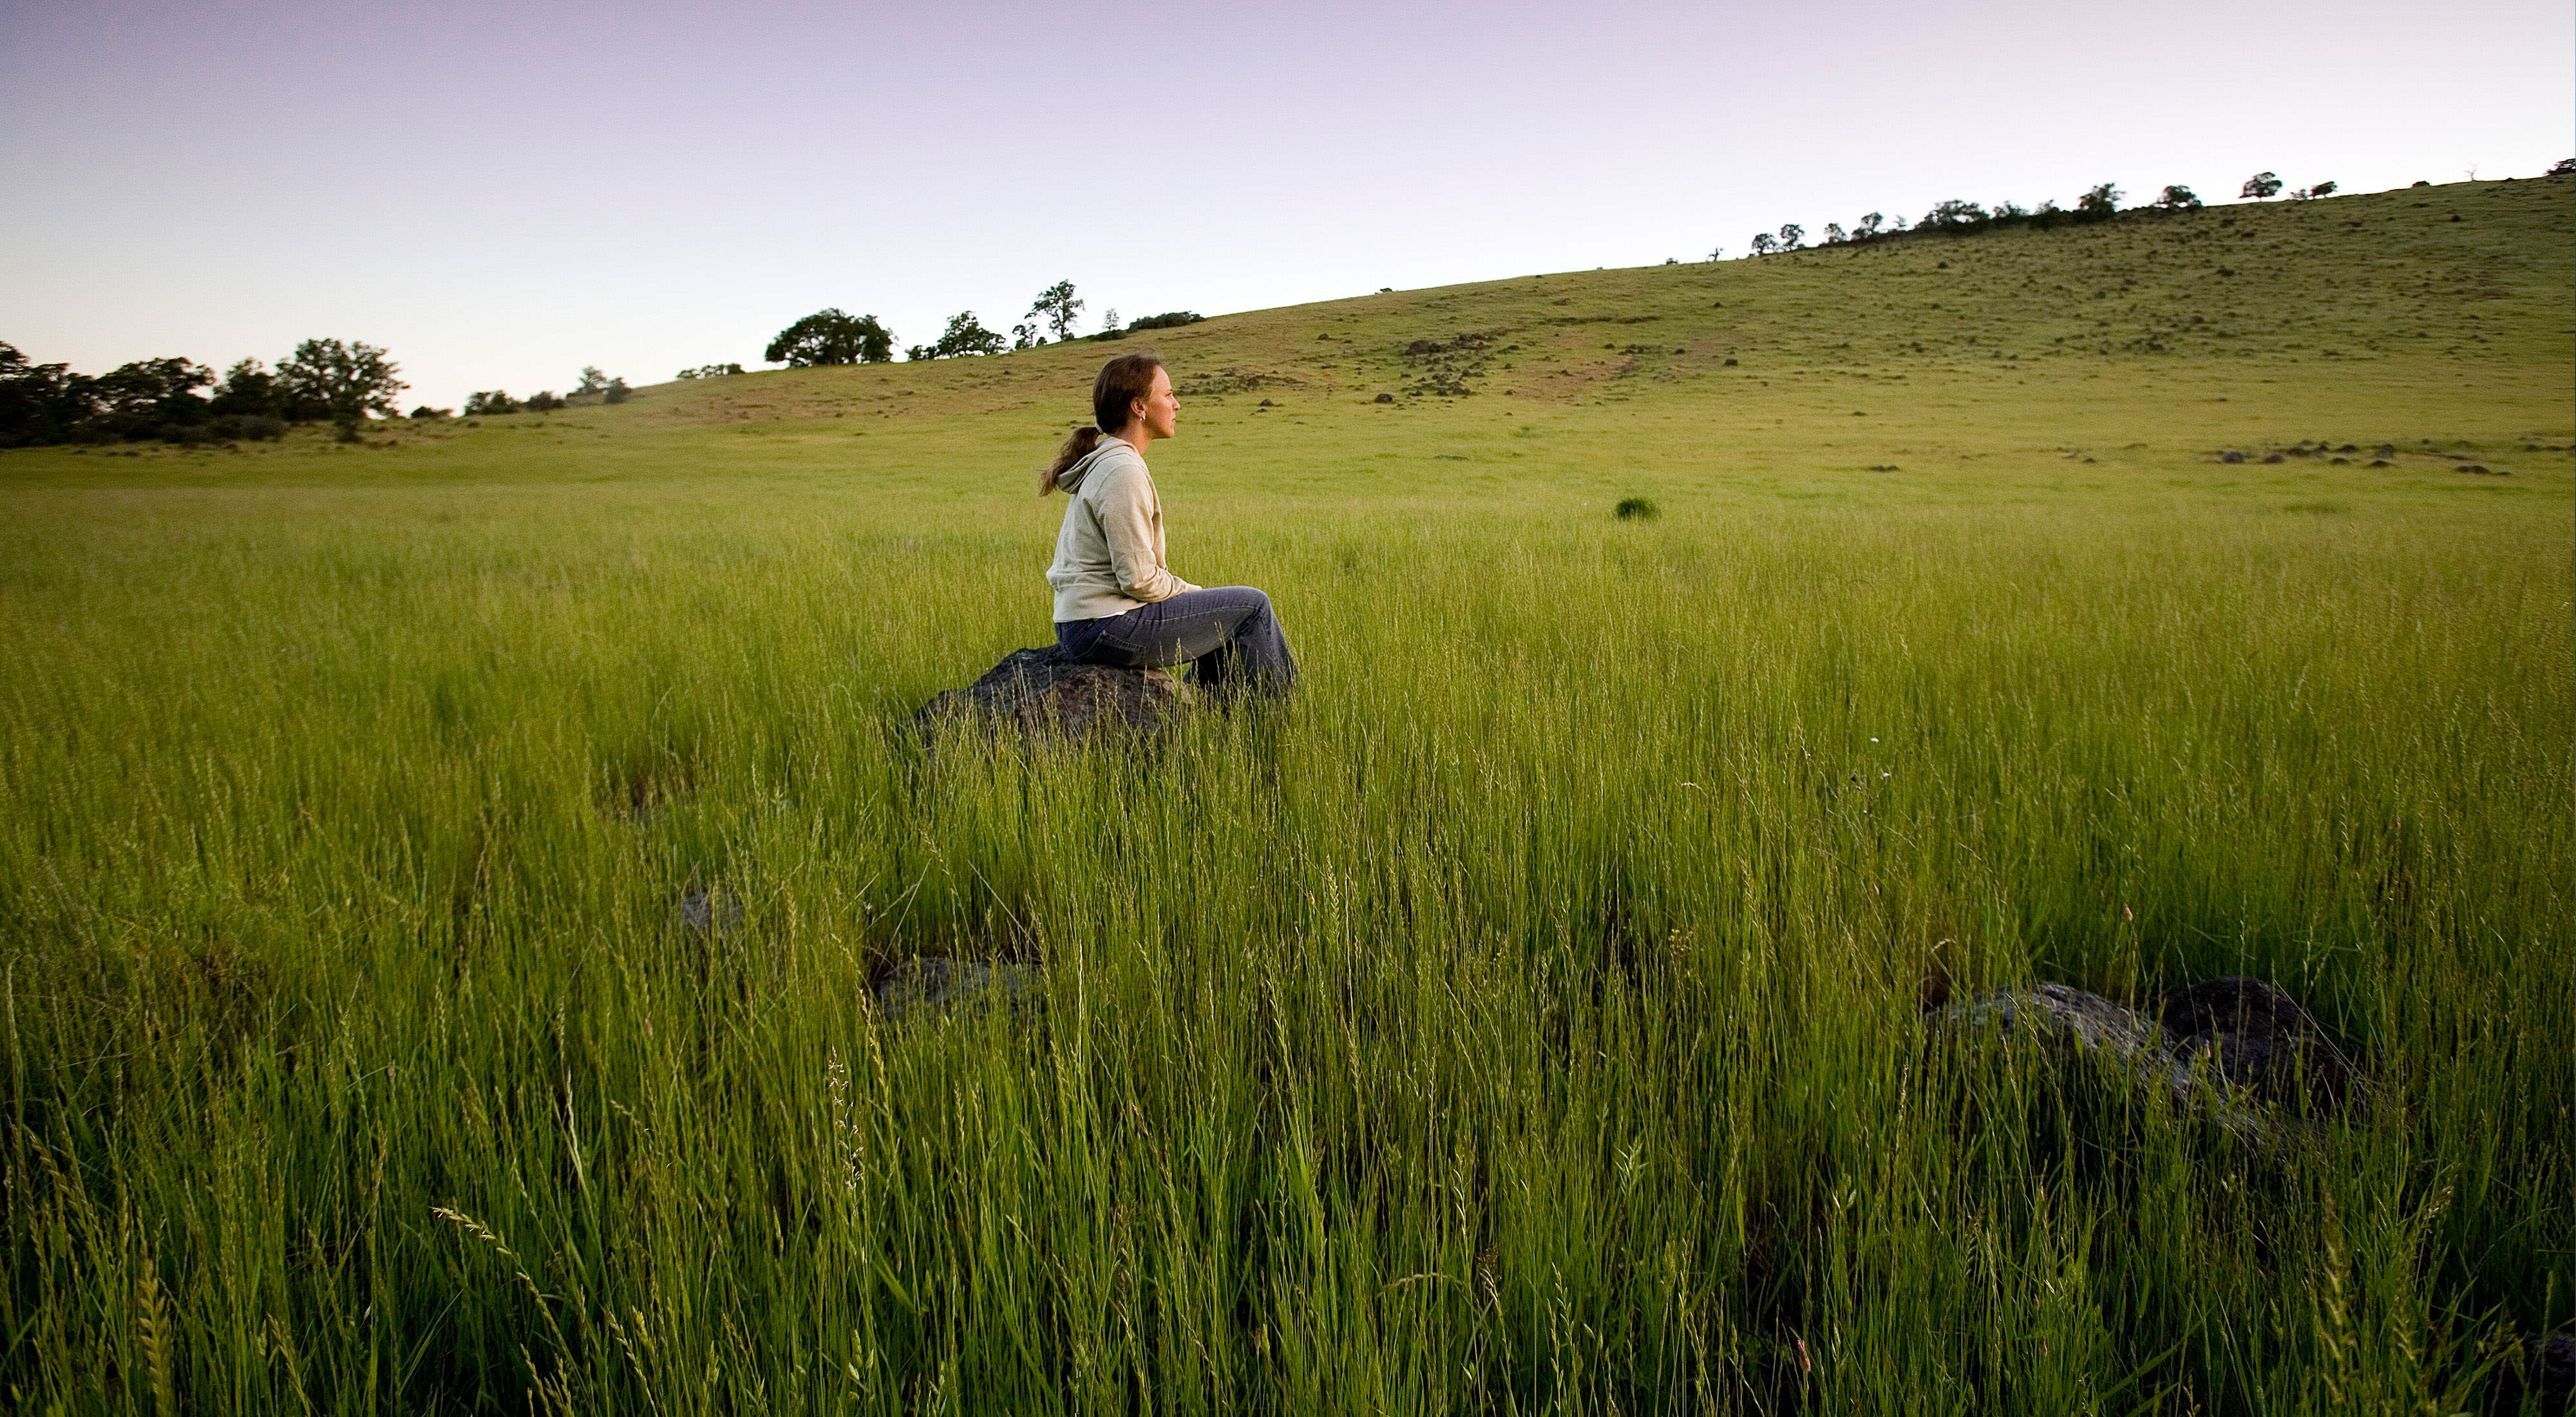 A female hiker pauses to view the lush grasslands